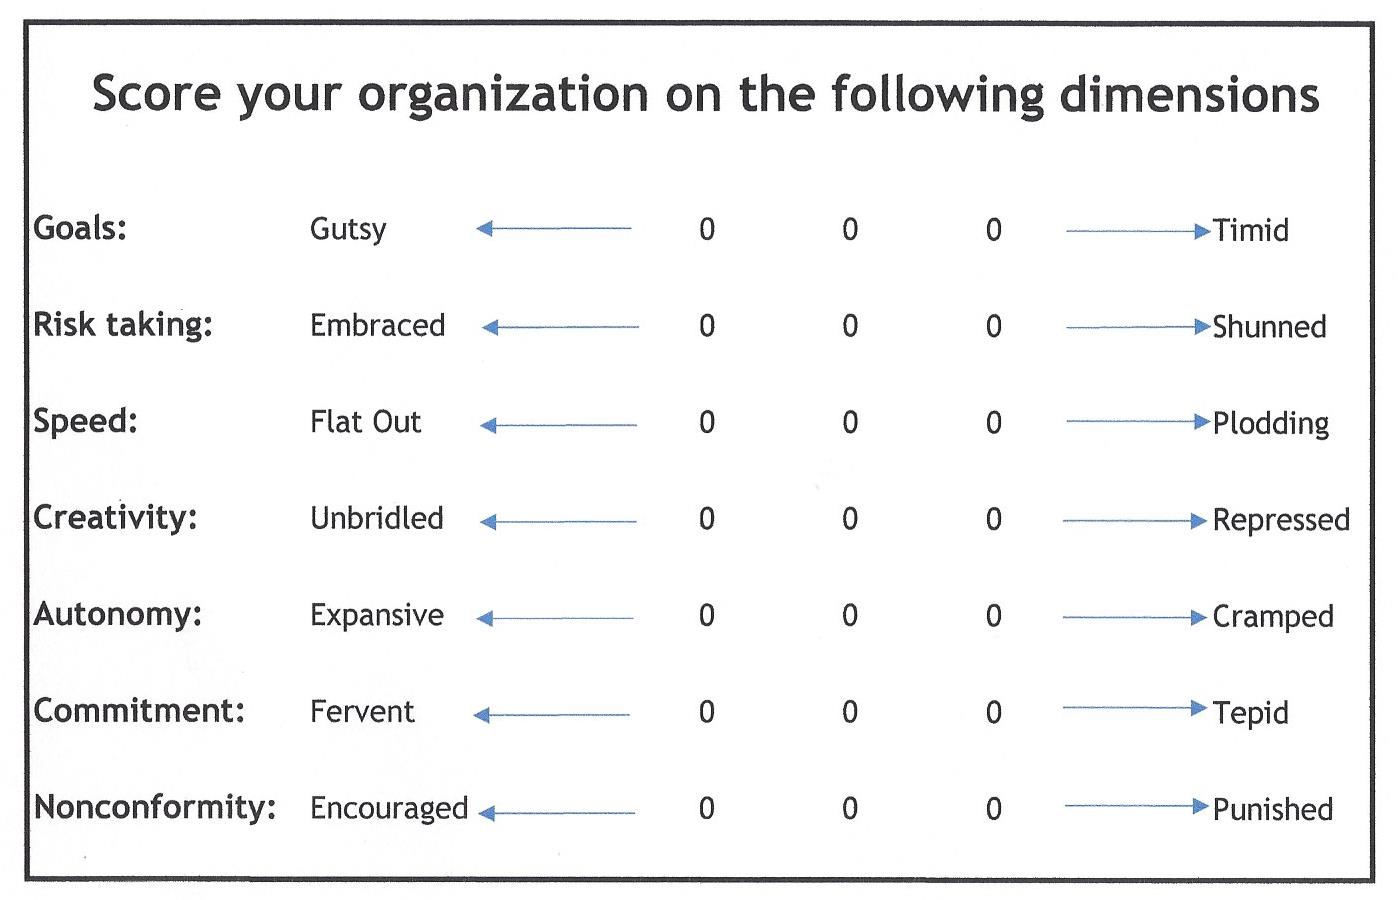 Humoncracy Score Your Org on 7 Dimensions